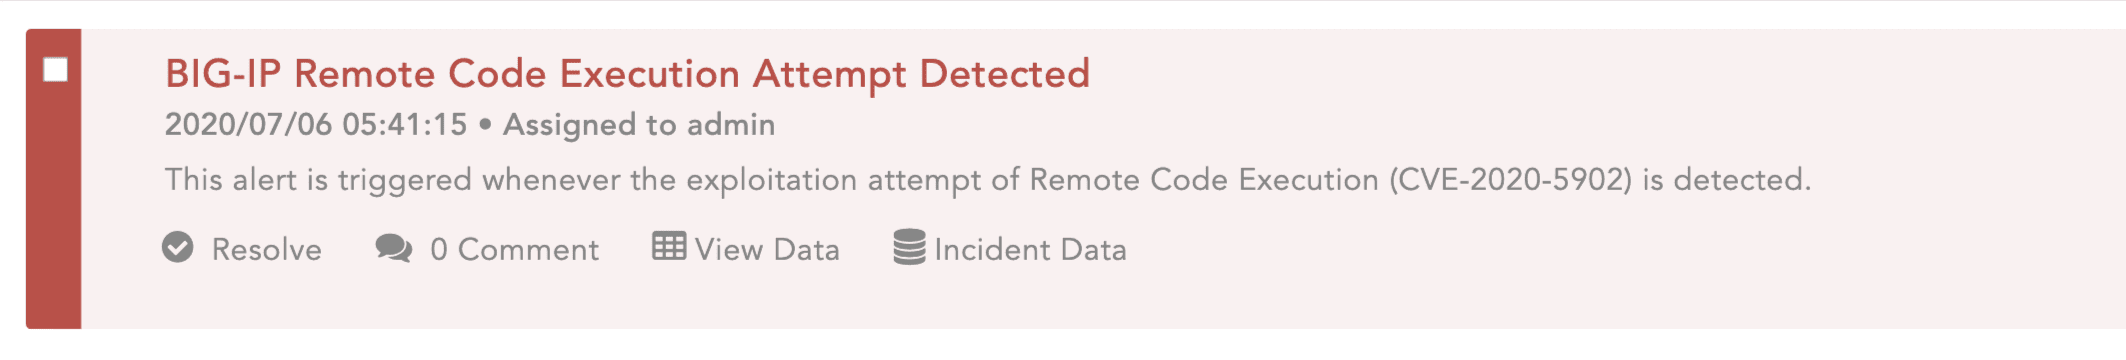 Remote code execution attempt detected alert